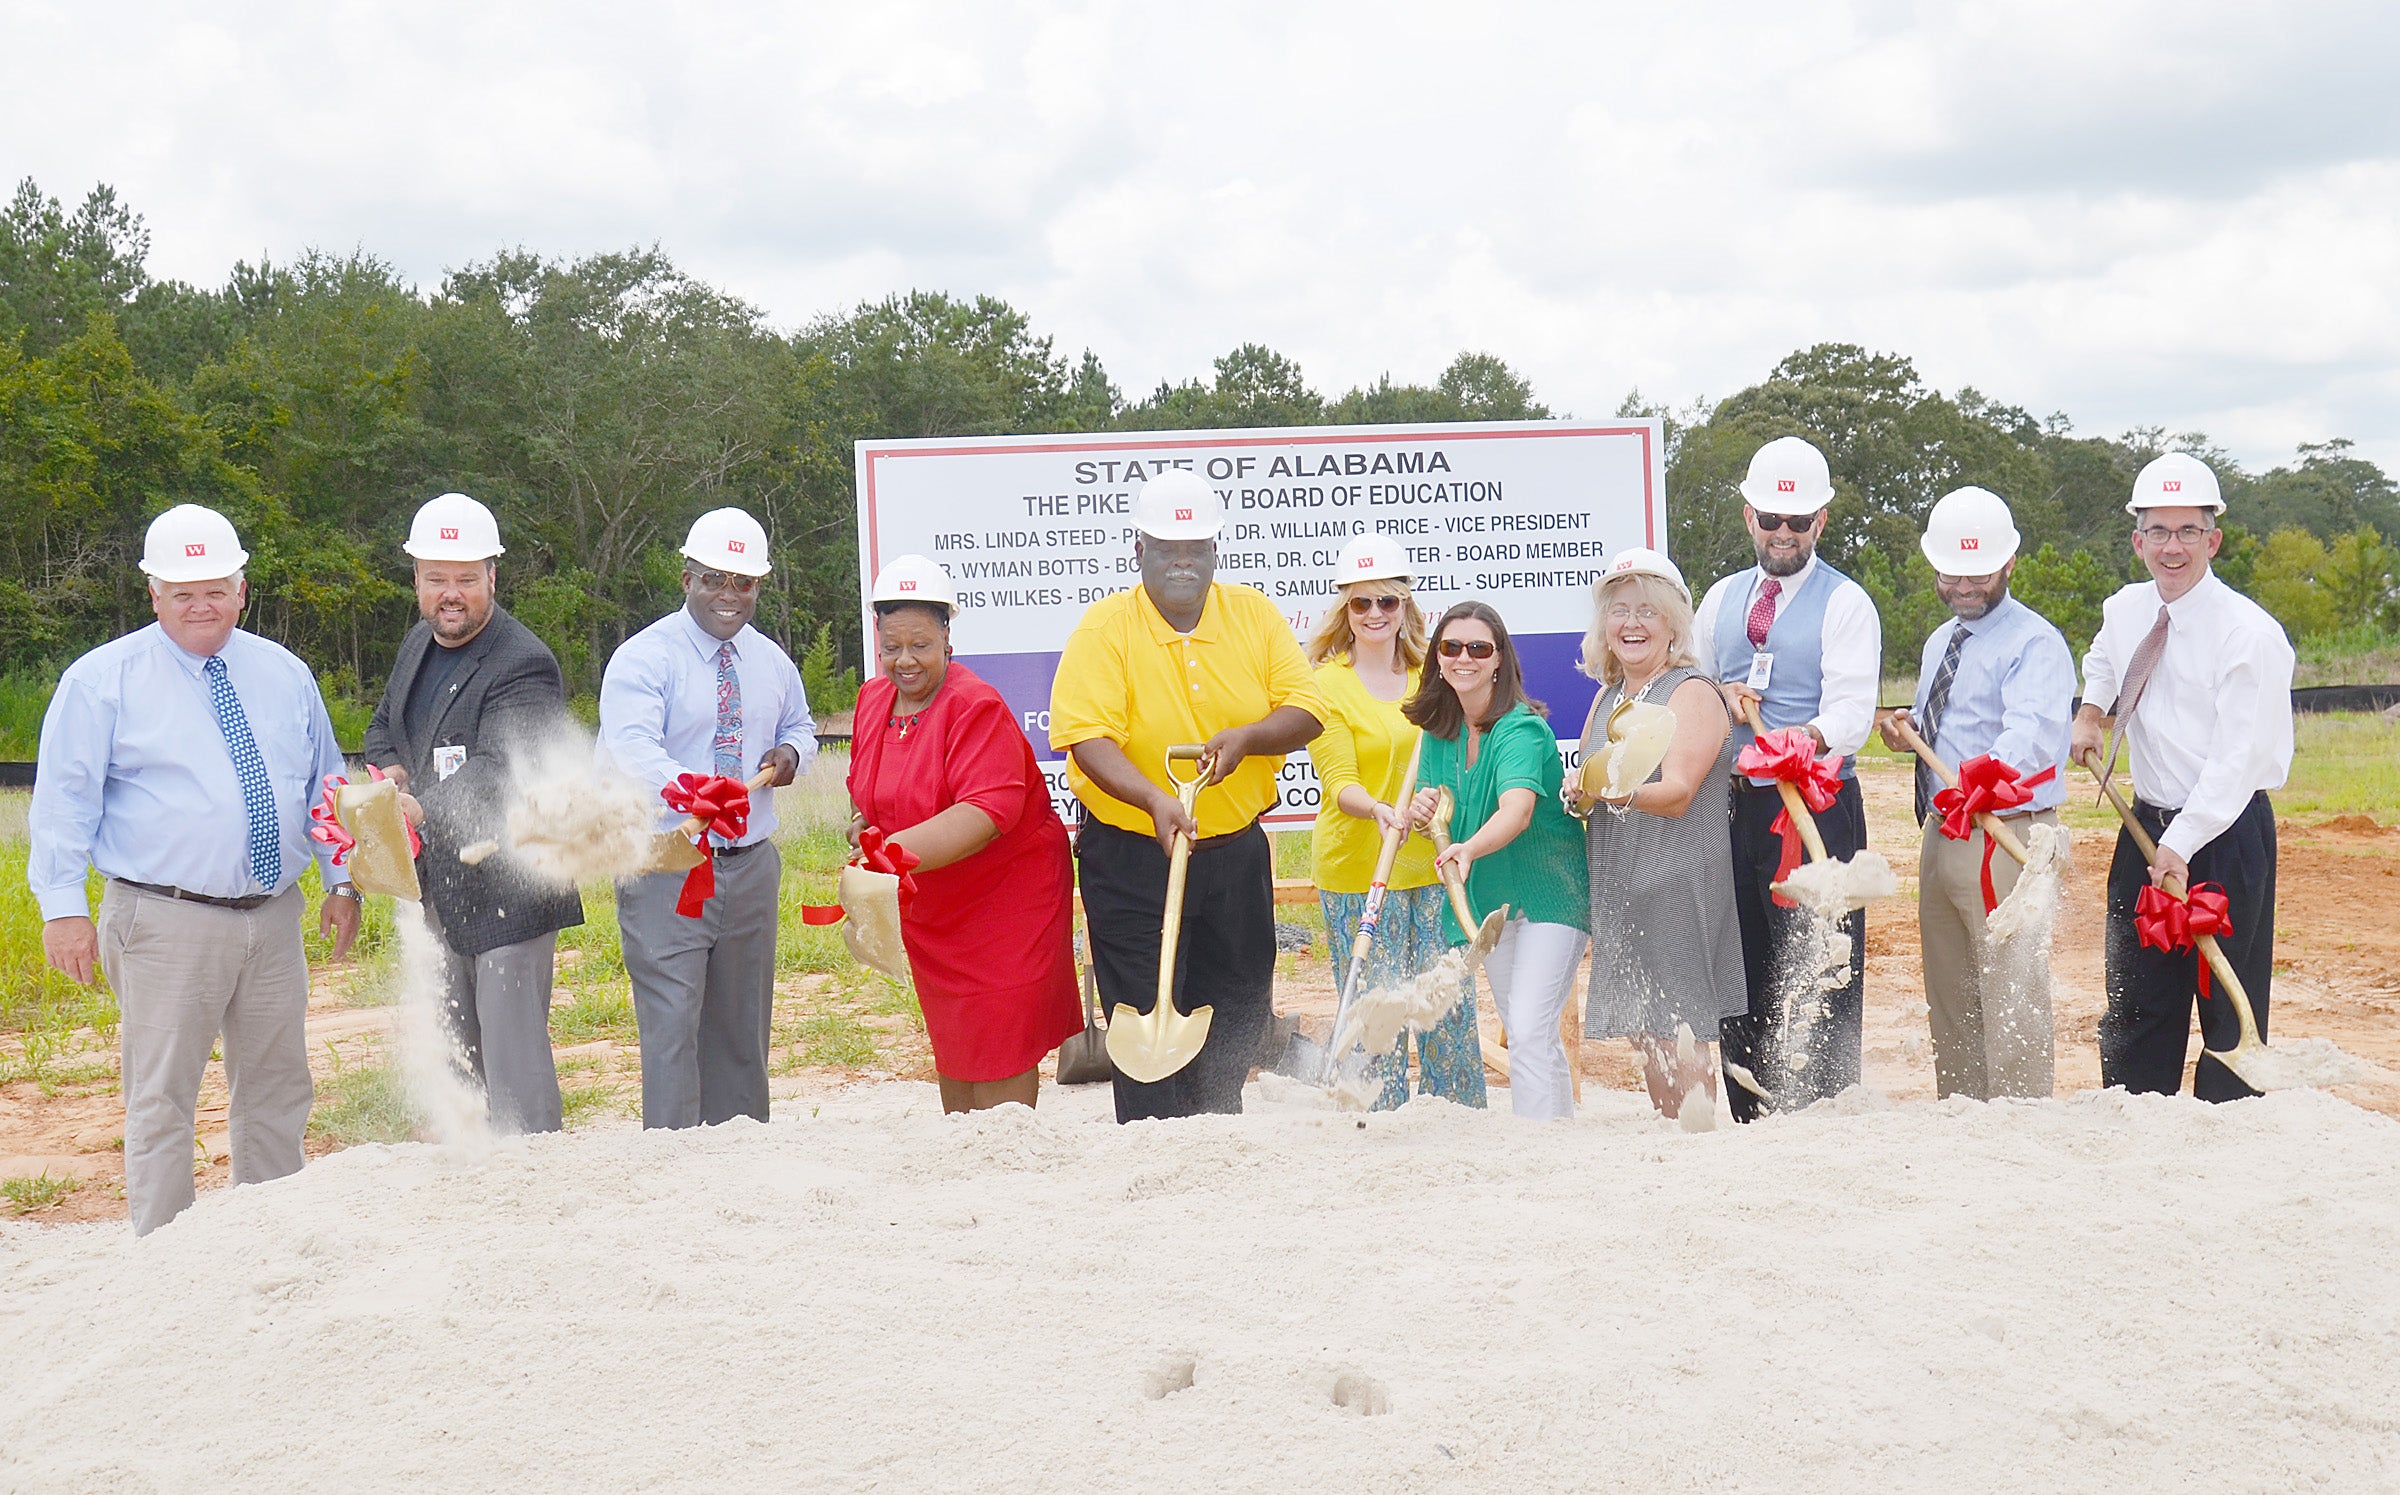 NEW GROUND: Pike County BOE breaks ground on $1m advanced learning